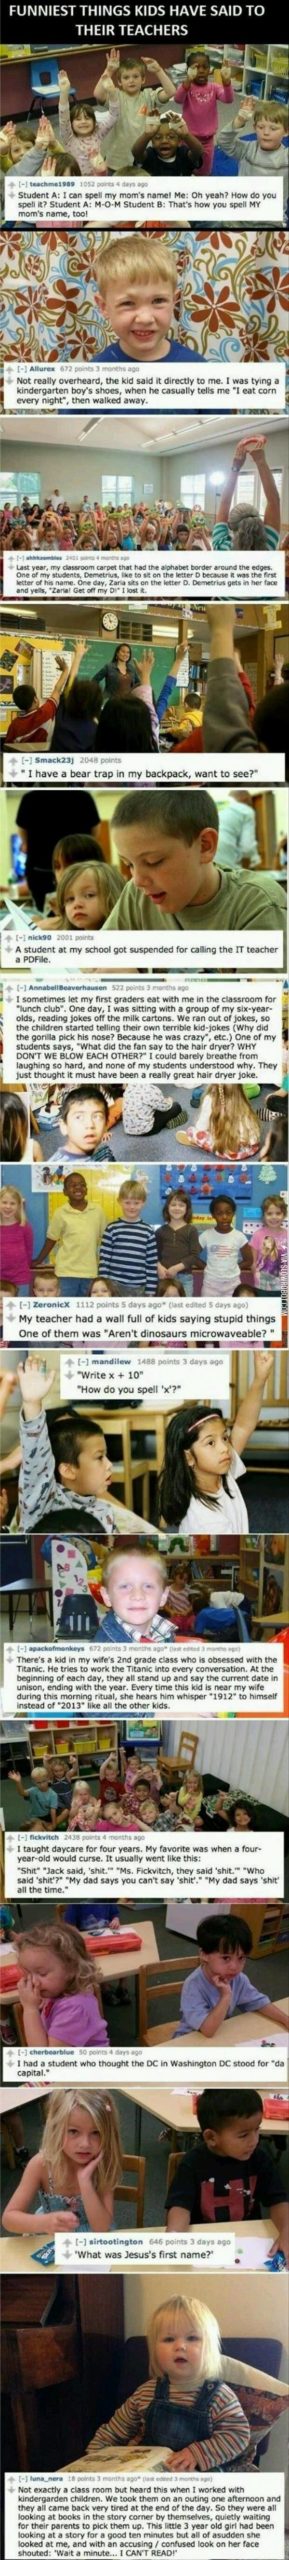 Funniest+things+kids+have+said+to+their+teachers